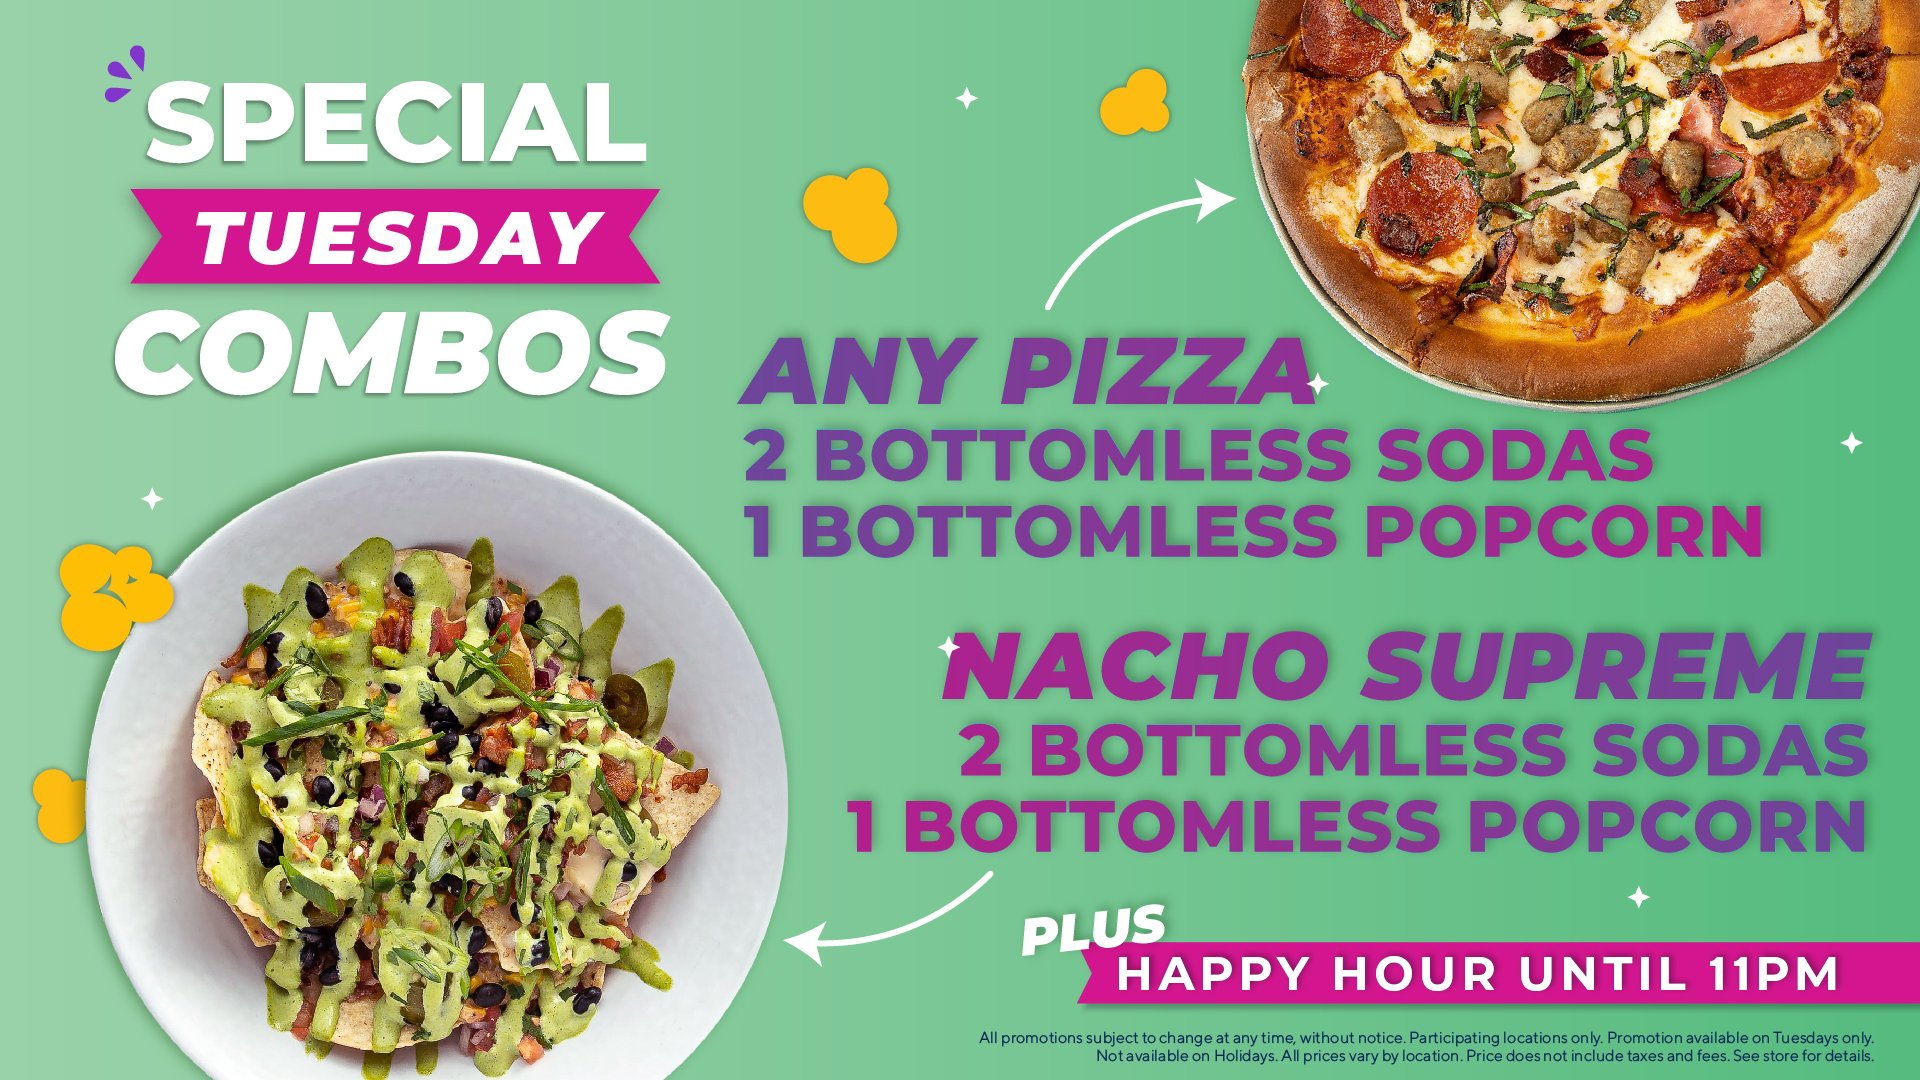 Special Pizza or Nacho Tuesday Combos at Cinepolis and Moviehouse